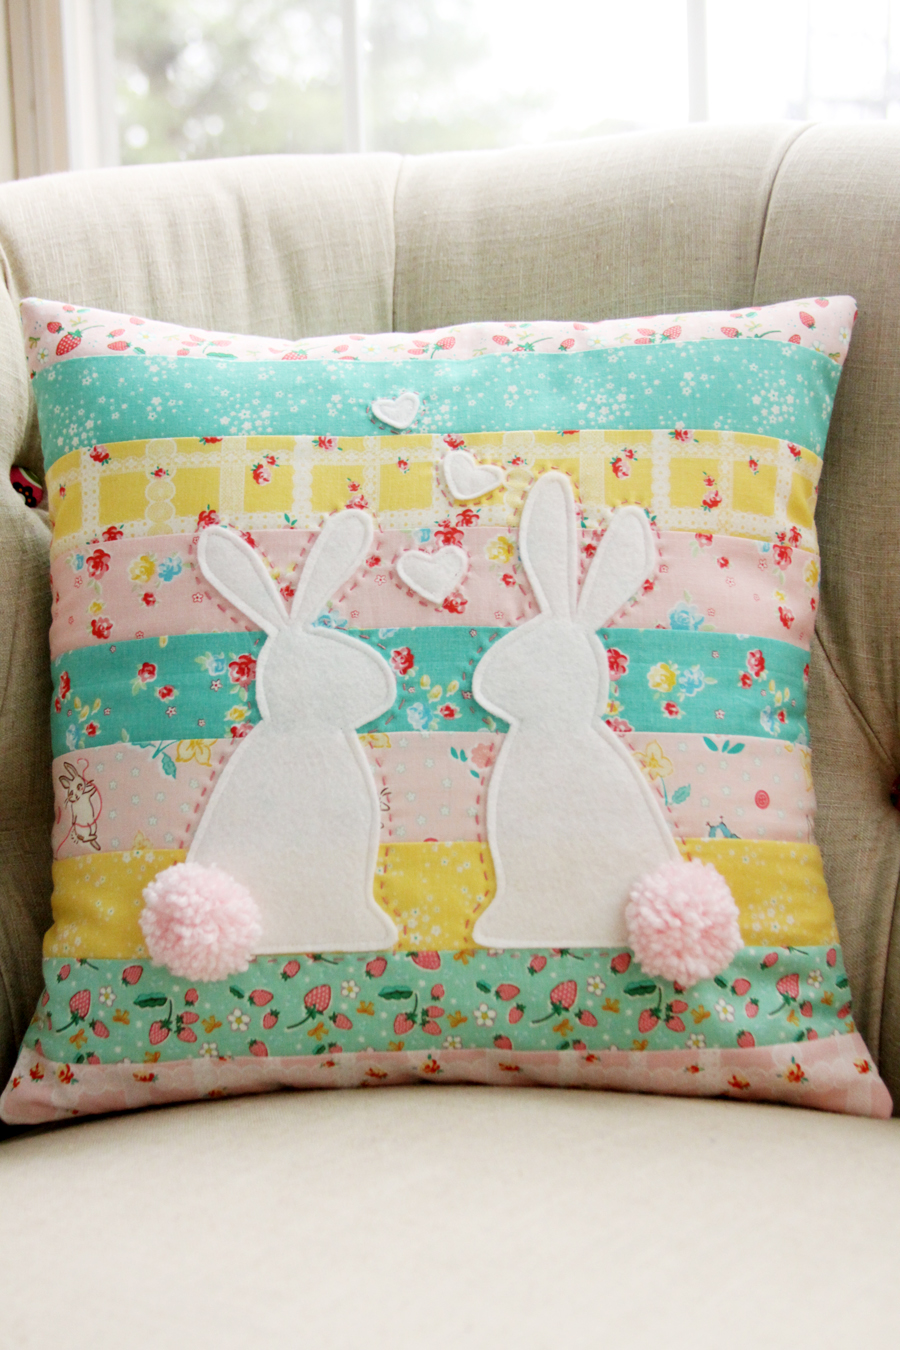 Spring Bunnies in Love Pillow -